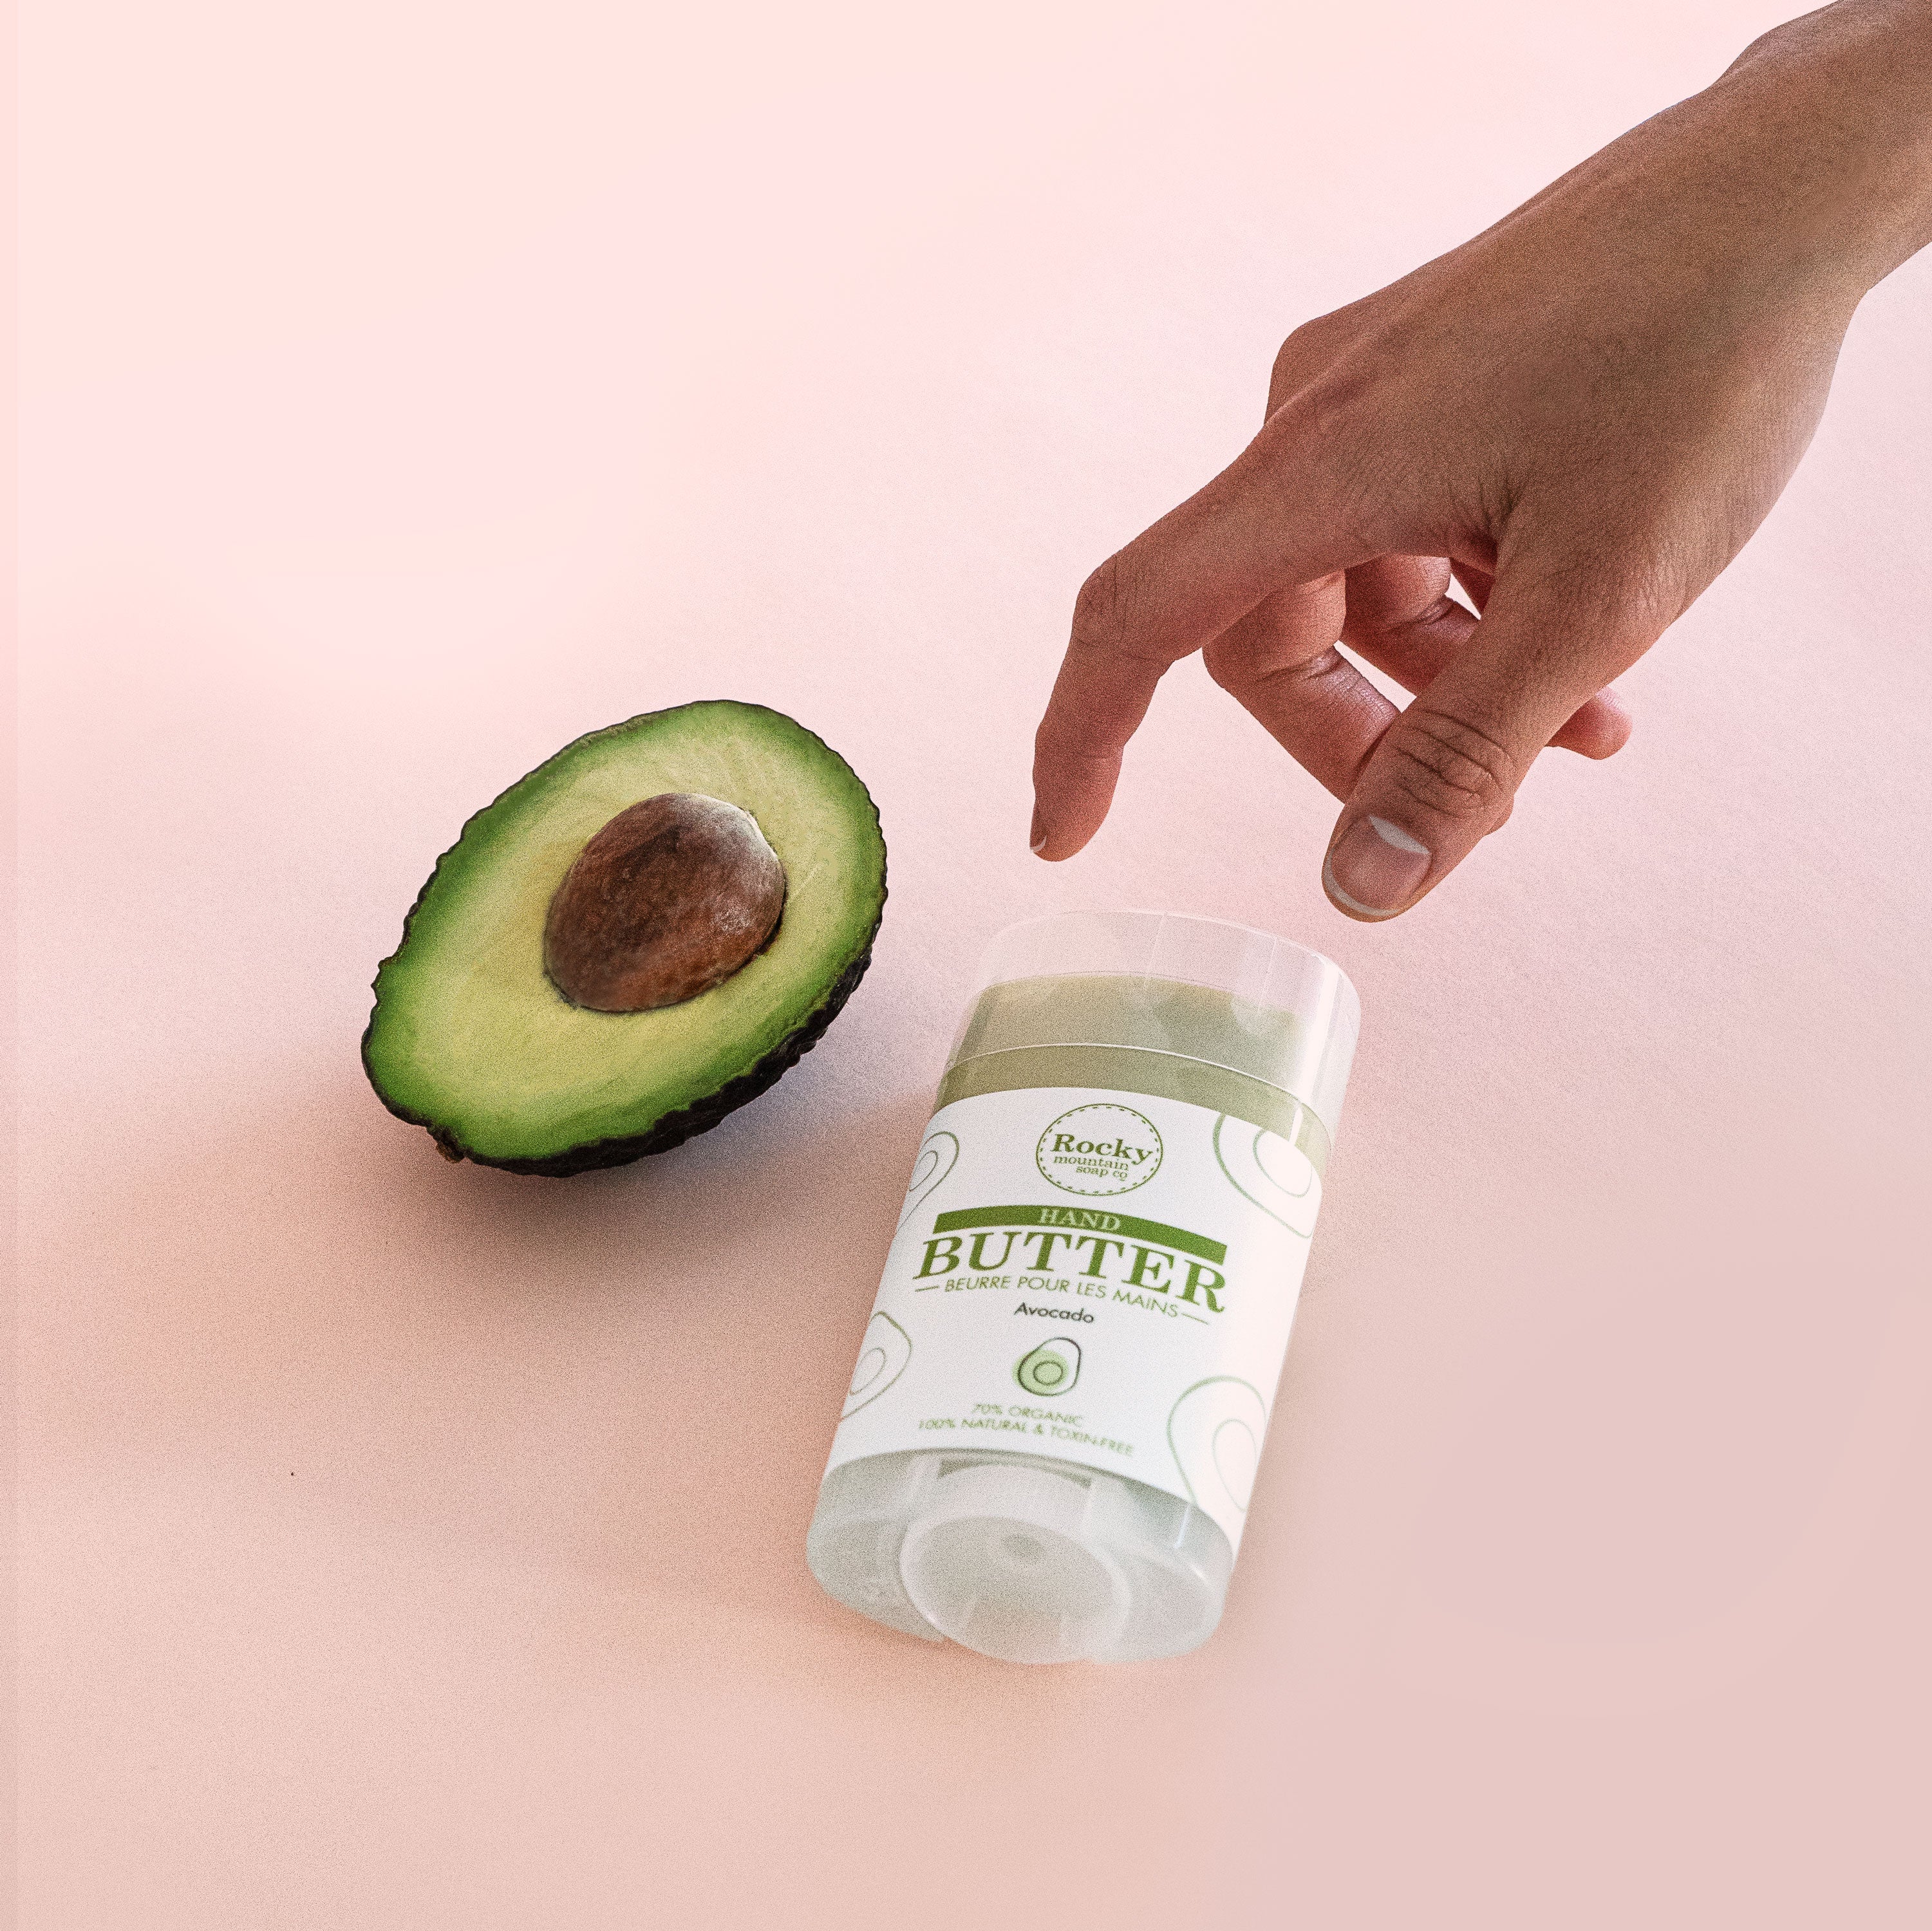 A hand reaches for a Rocky Mountain Soap Company Hand Butter that's place next to half an avocado on a pink background. 